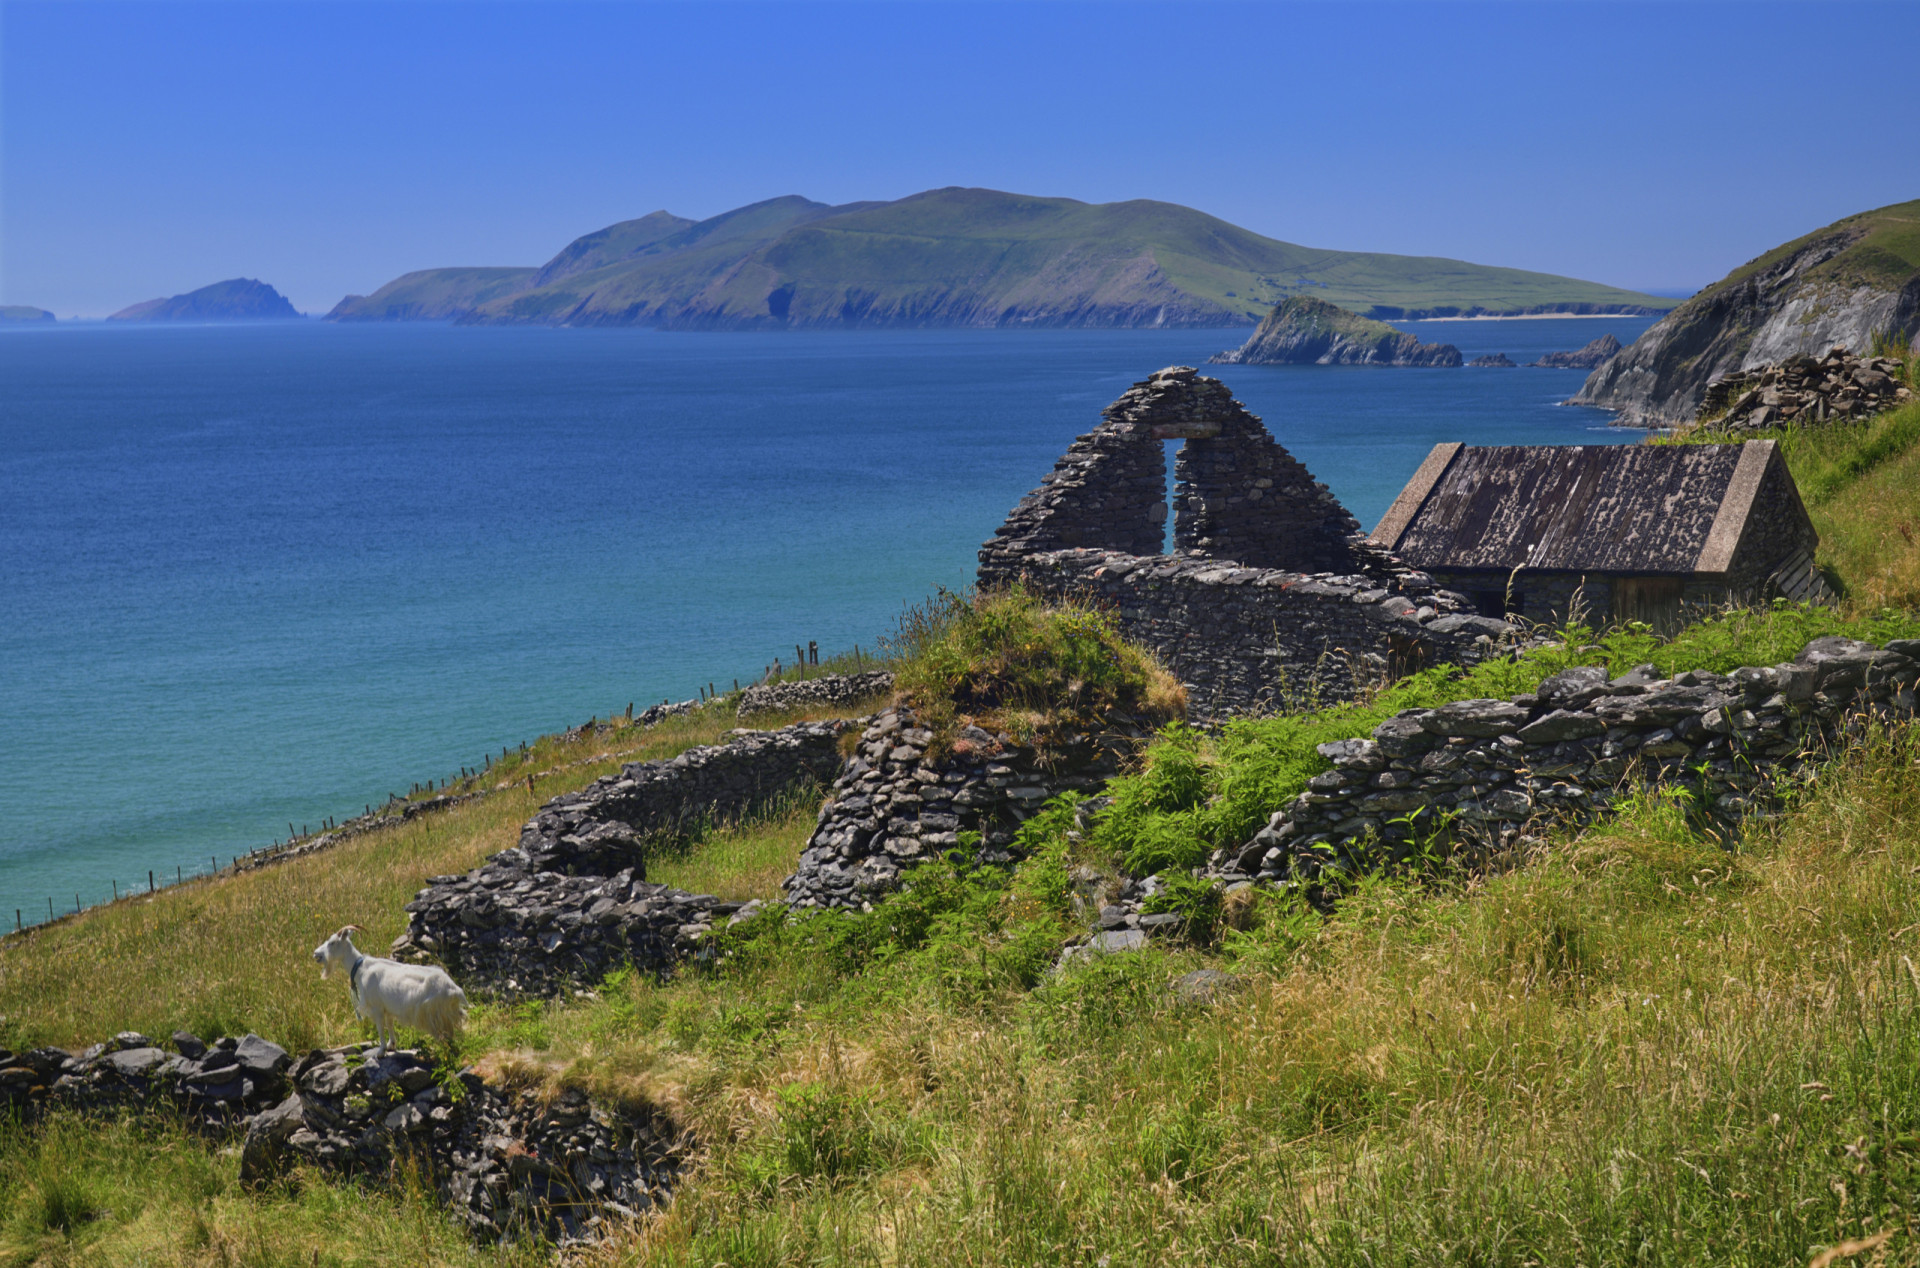 <p>An Area of Special Conservation, the islands are home to abundant wildlife and fauna. Deserted since 1953, the Irish-speaking former inhabitants produced much literature that provides a glimpse into the past and the history of the place.</p>